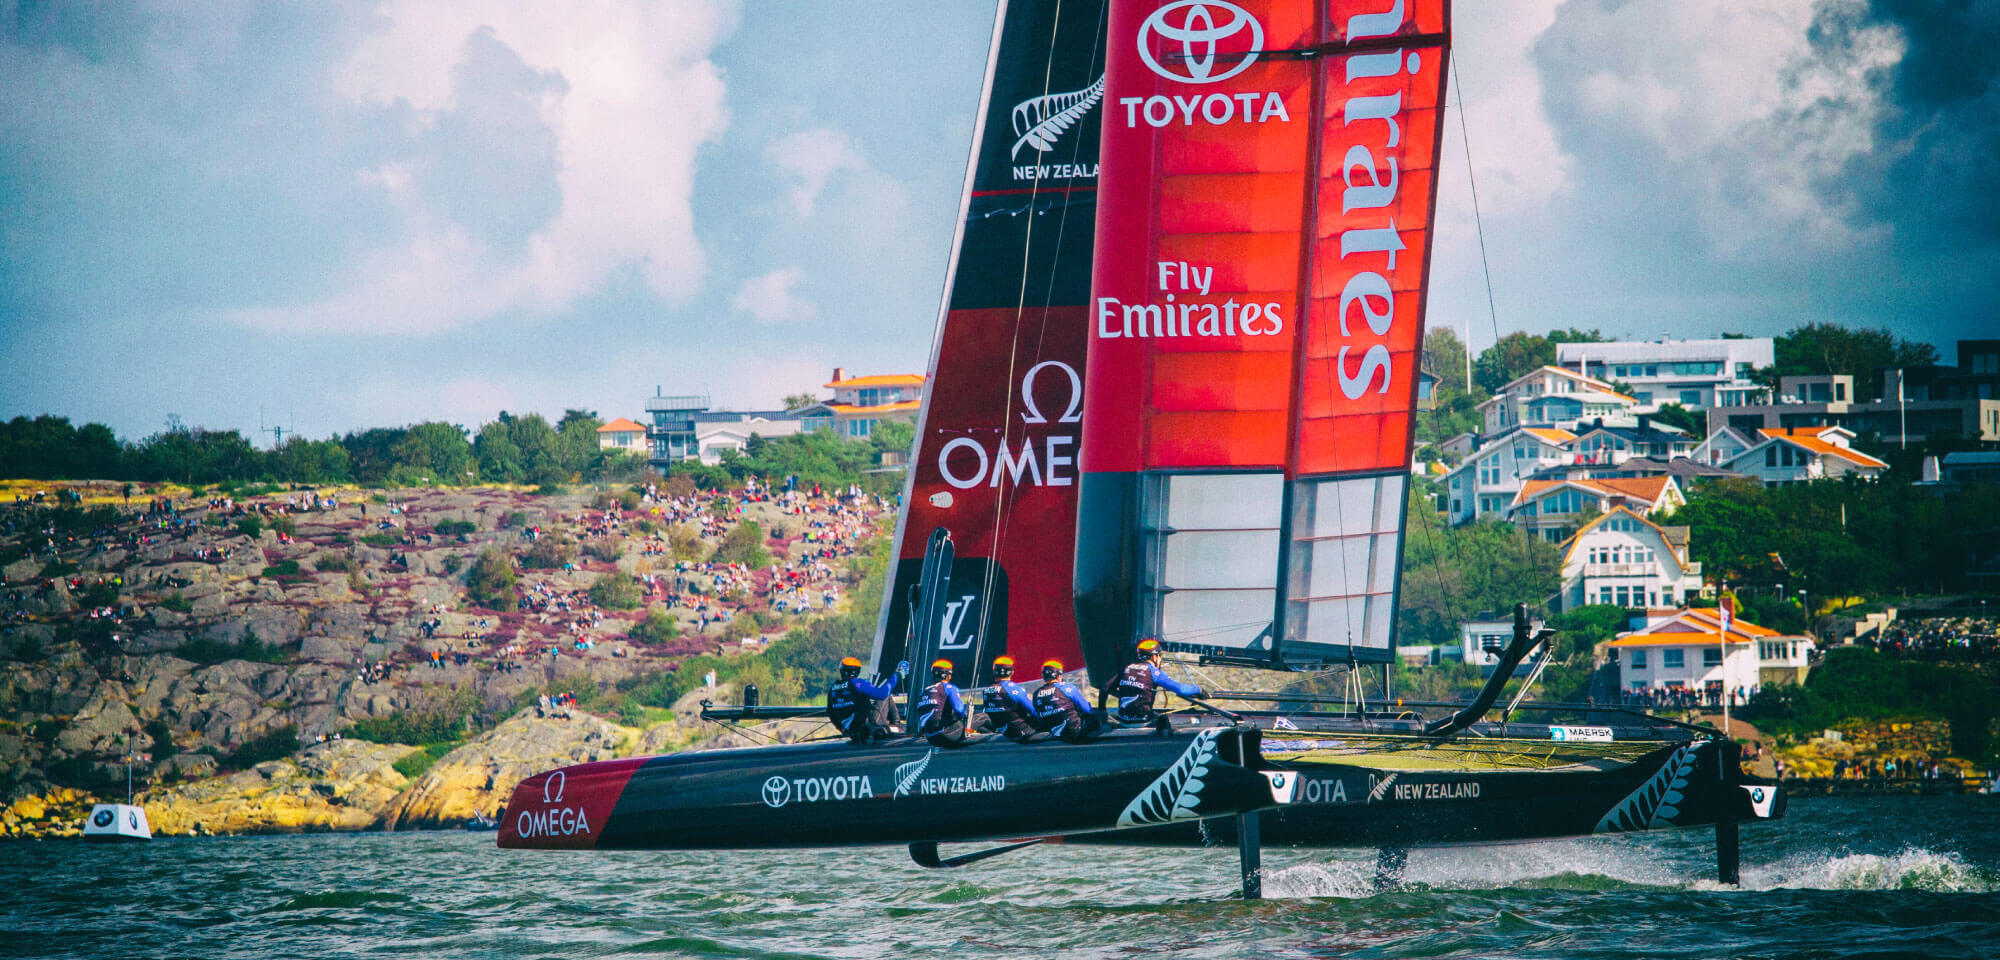 Innovation Helps Emirates Team New Zealand Sail to a 2017 Americas Cup Victory